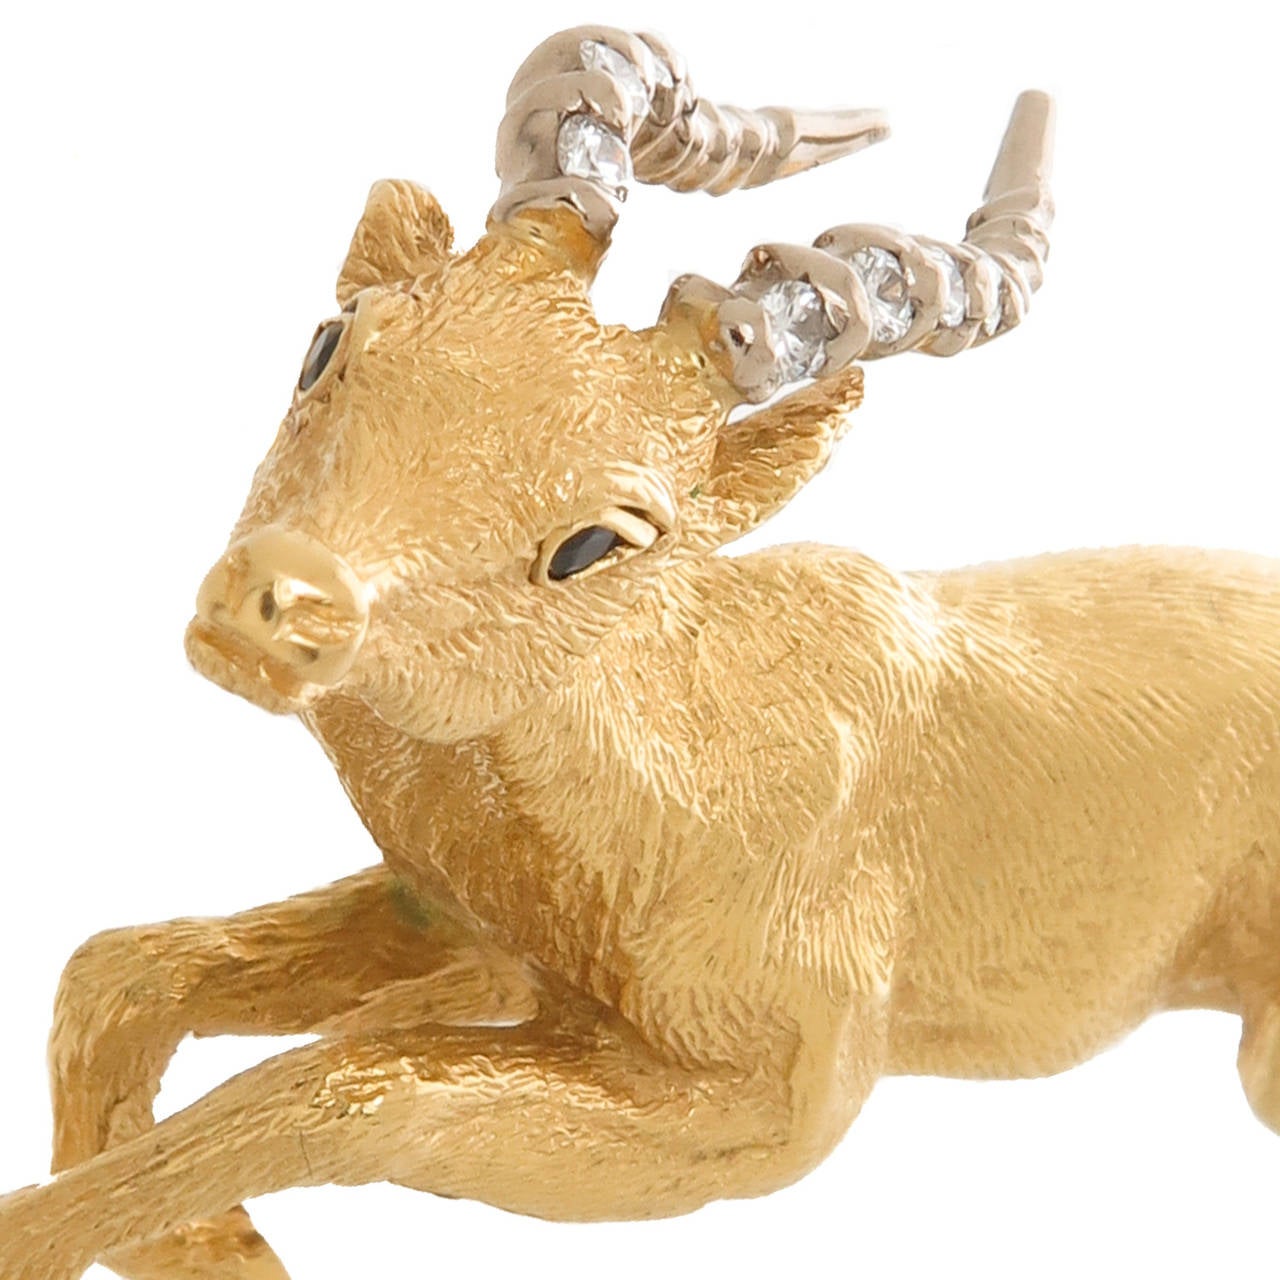 Circa 1990s 18K Yellow Gold and Diamond set Gazelle Brooch, further accented with Sapphire eyes, textured finish and very well detailed. Measuring 2 inch in length. Original Tiffany Presentation Box.